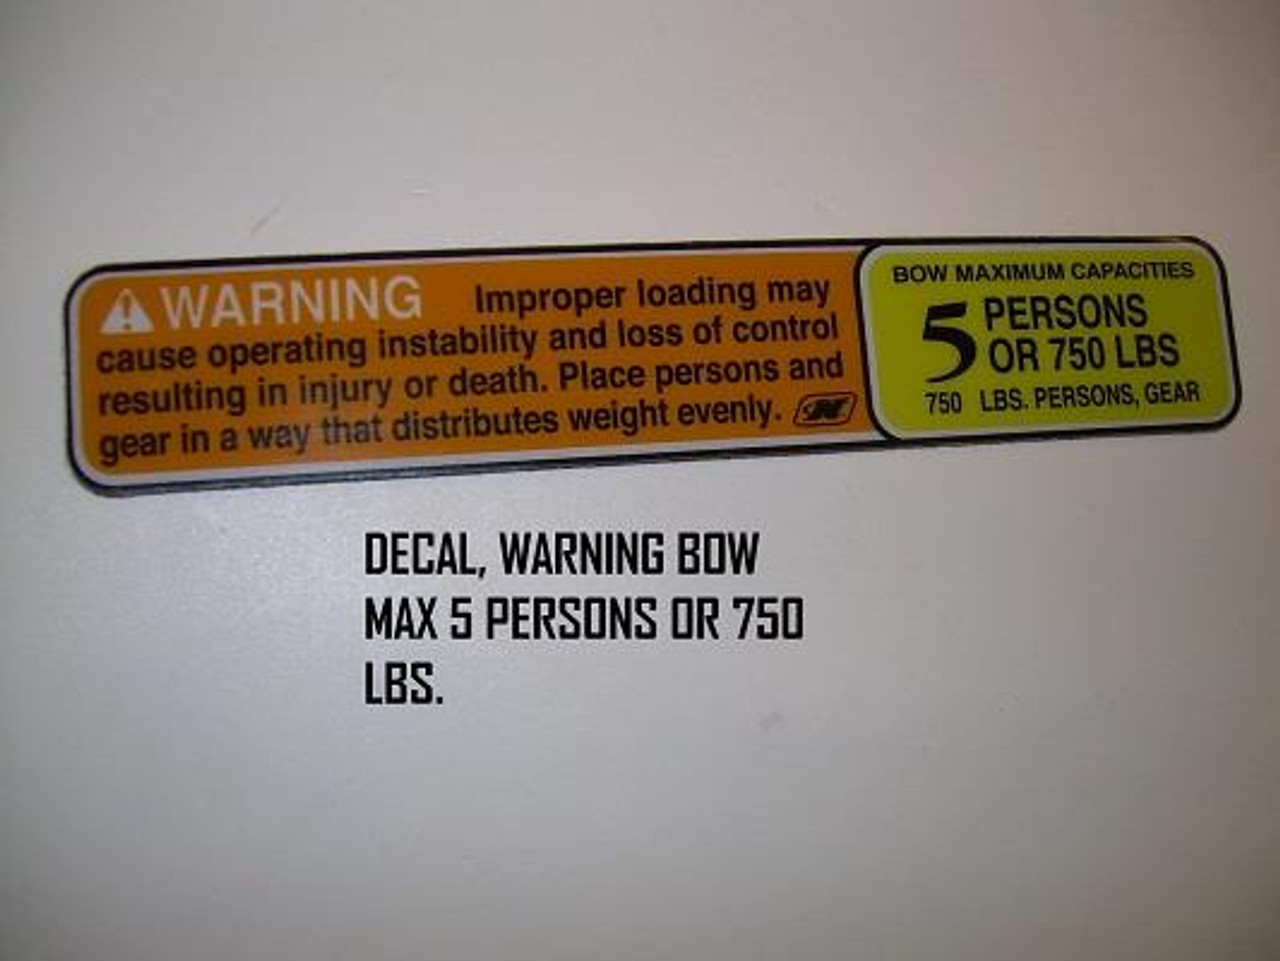 DECAL WARNING BOW MAX 5 PERSONS OR 750 LBS.